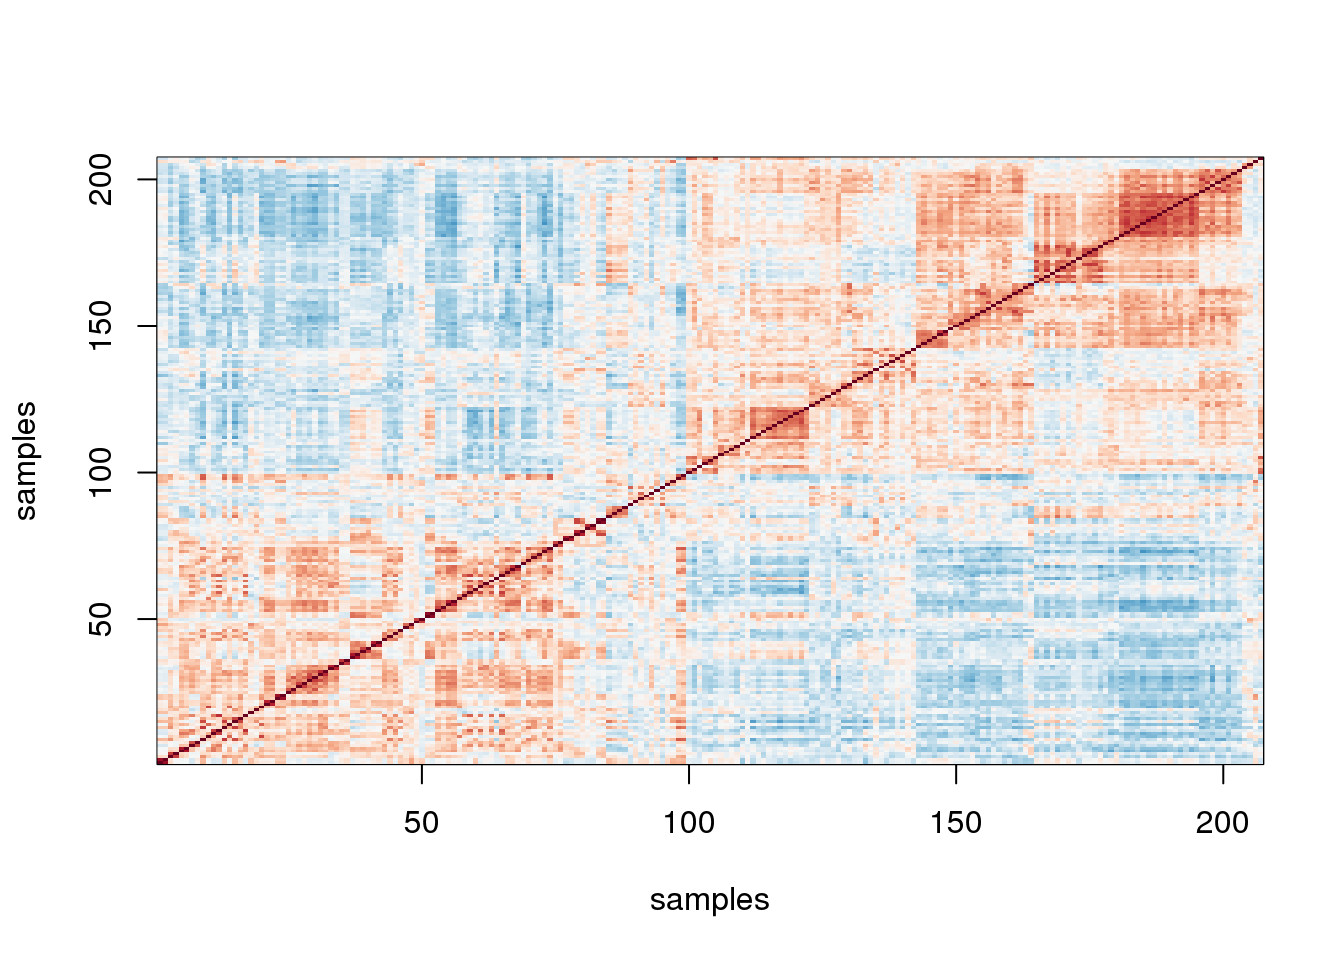 Image of correlations. Cell (i,j)  represents correlation between samples i and j. Red is high, white is 0 and red is negative.